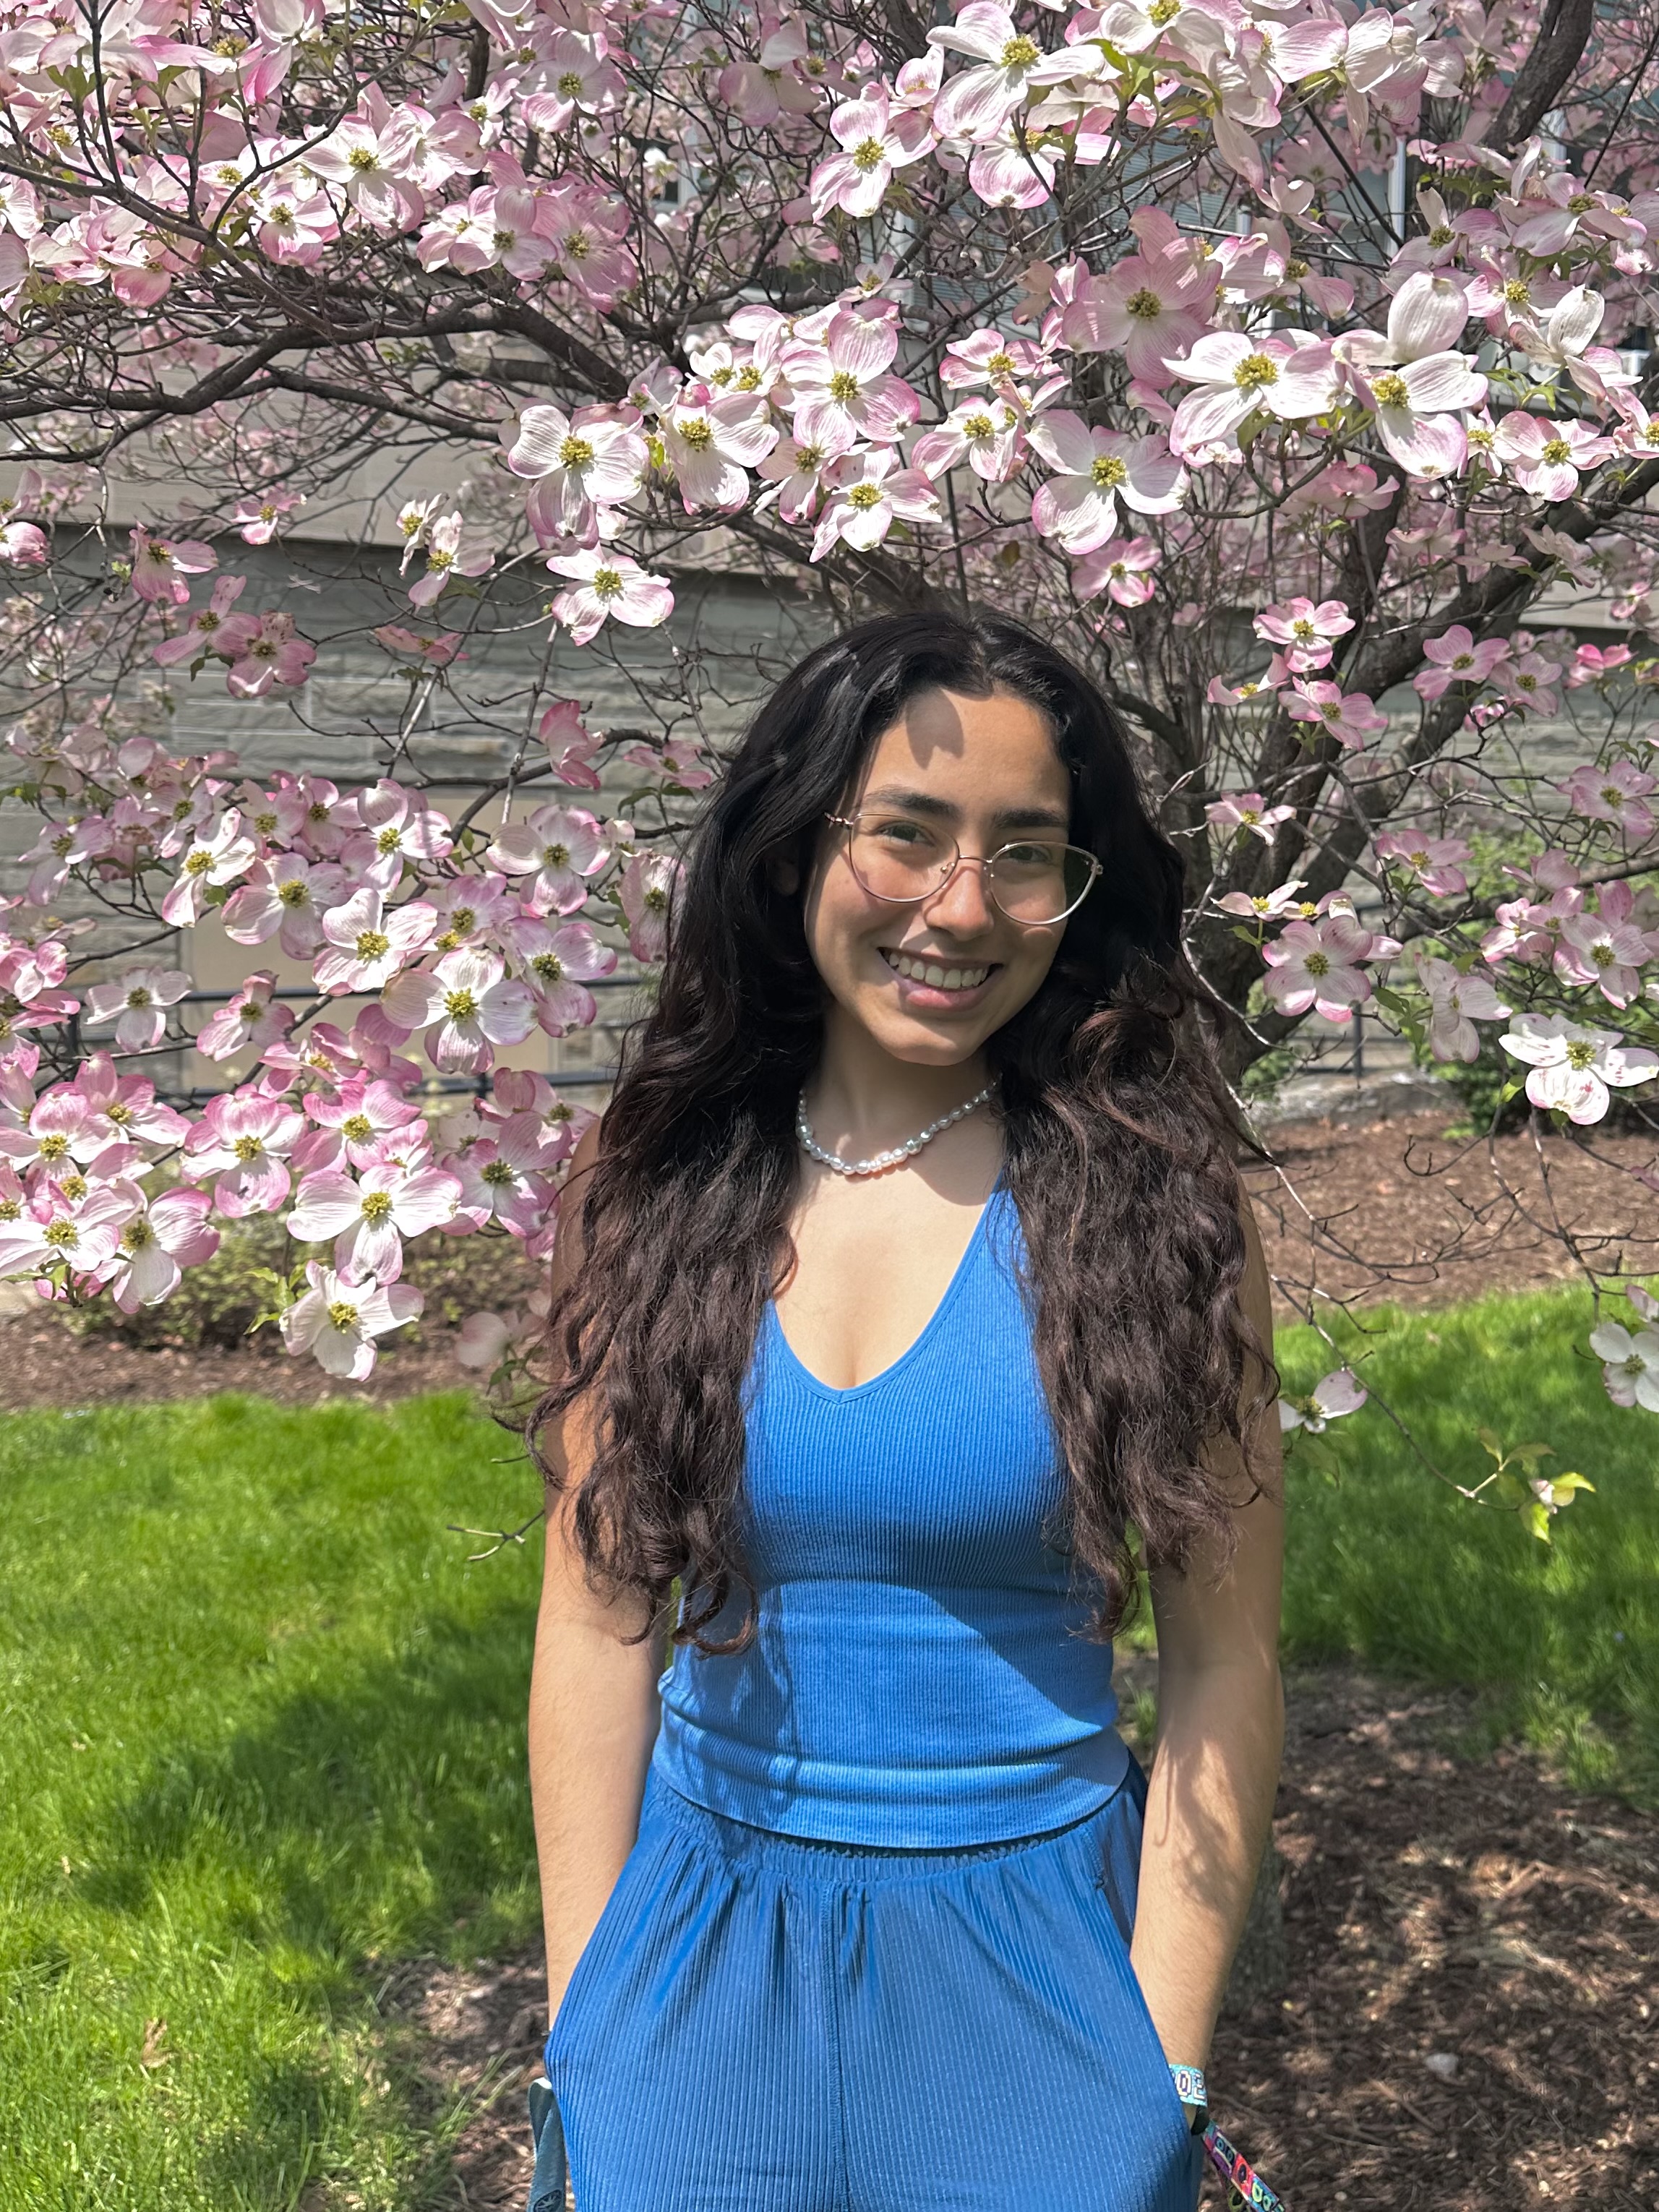 Silene with long hair down, blue top smiling under a cherry blossom tree